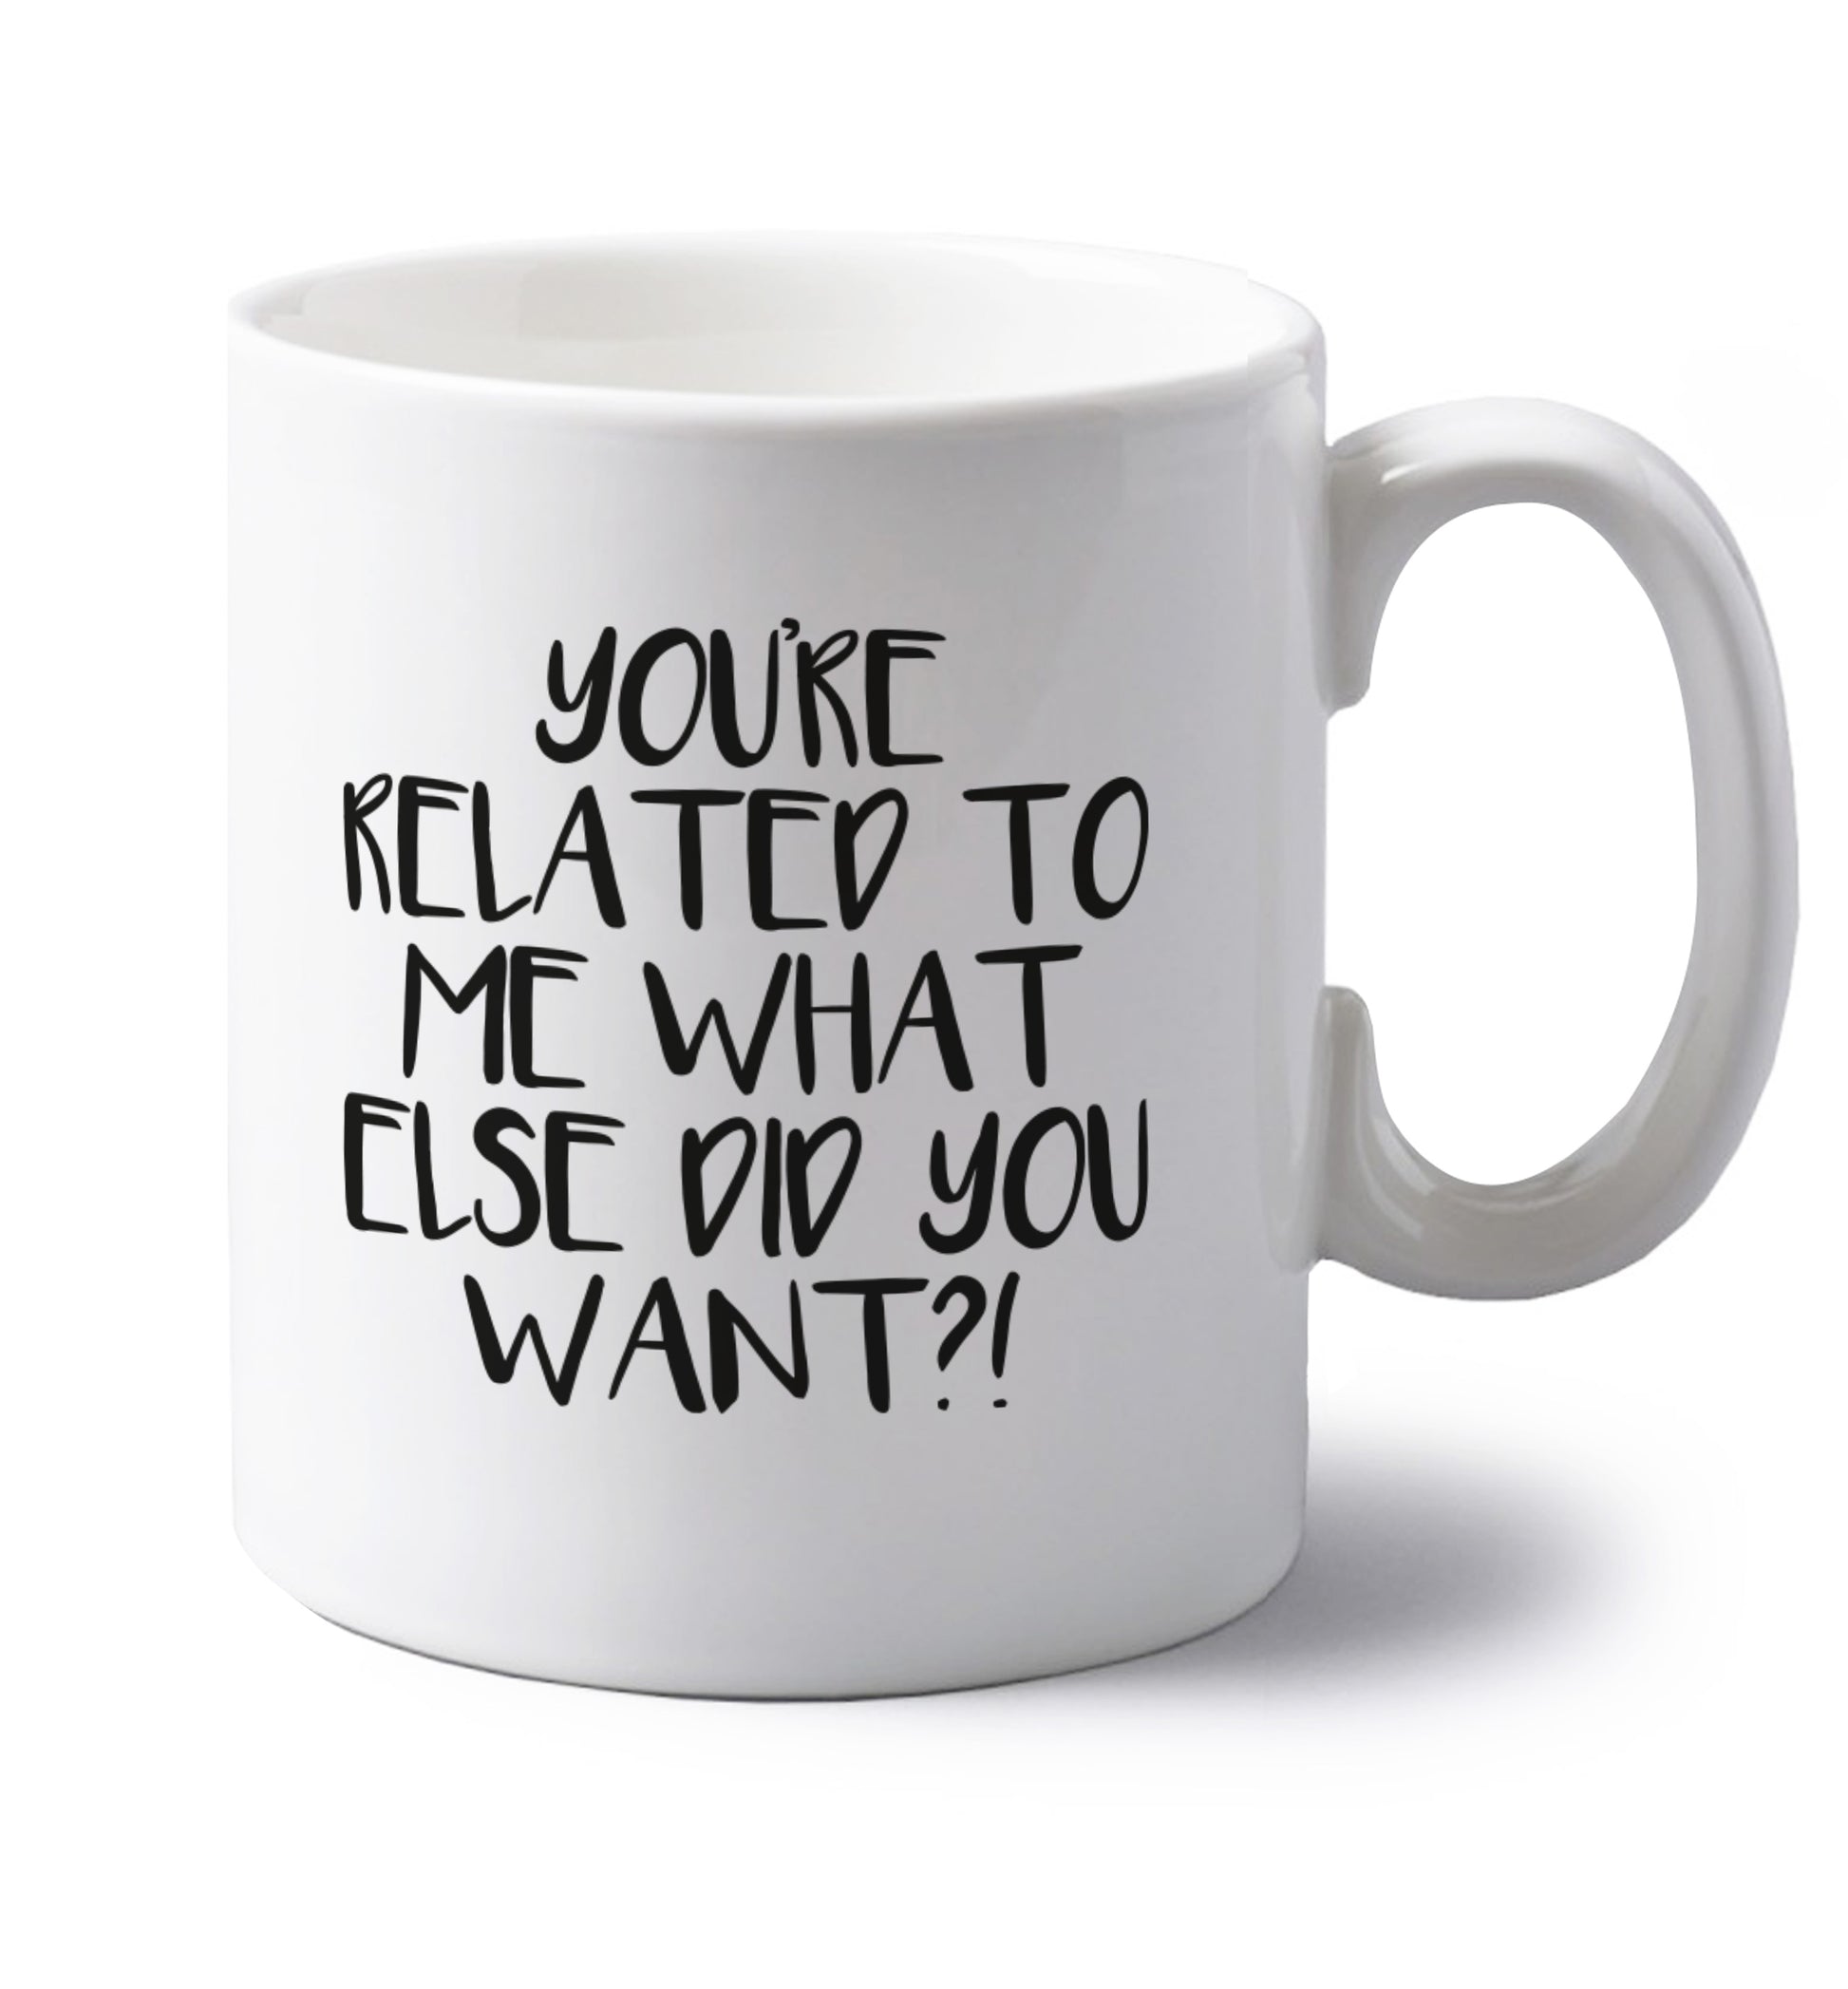 You're related to me what more do you want? left handed white ceramic mug 